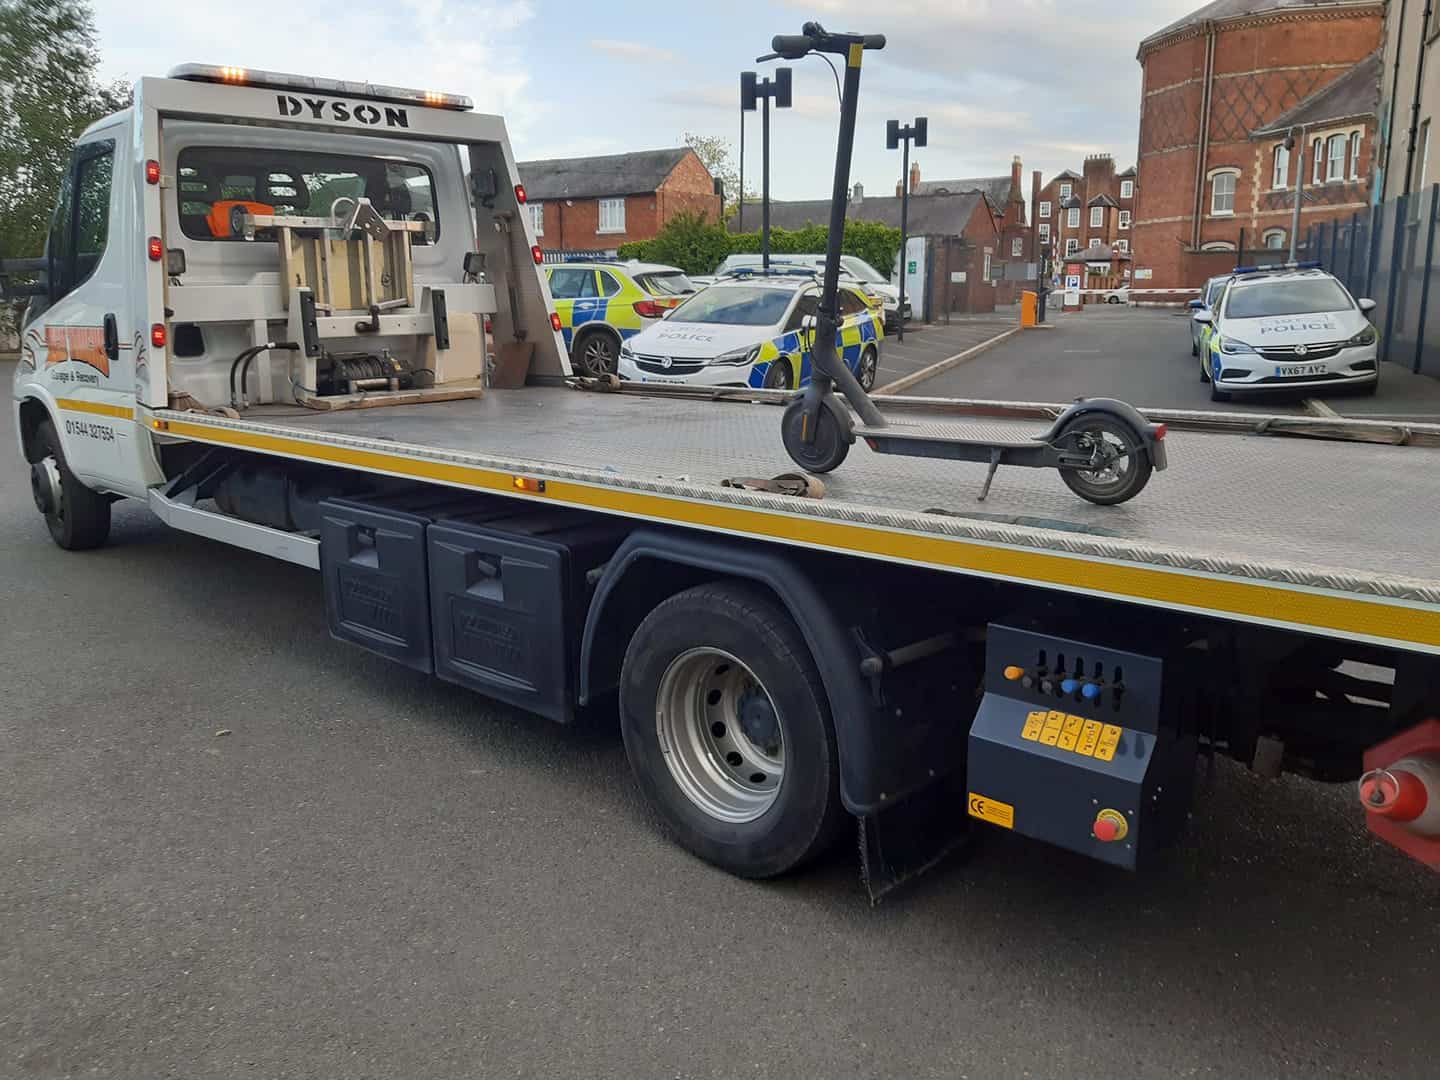 Police mocked on for using 7.5 tonne truck to tow away electric scooter